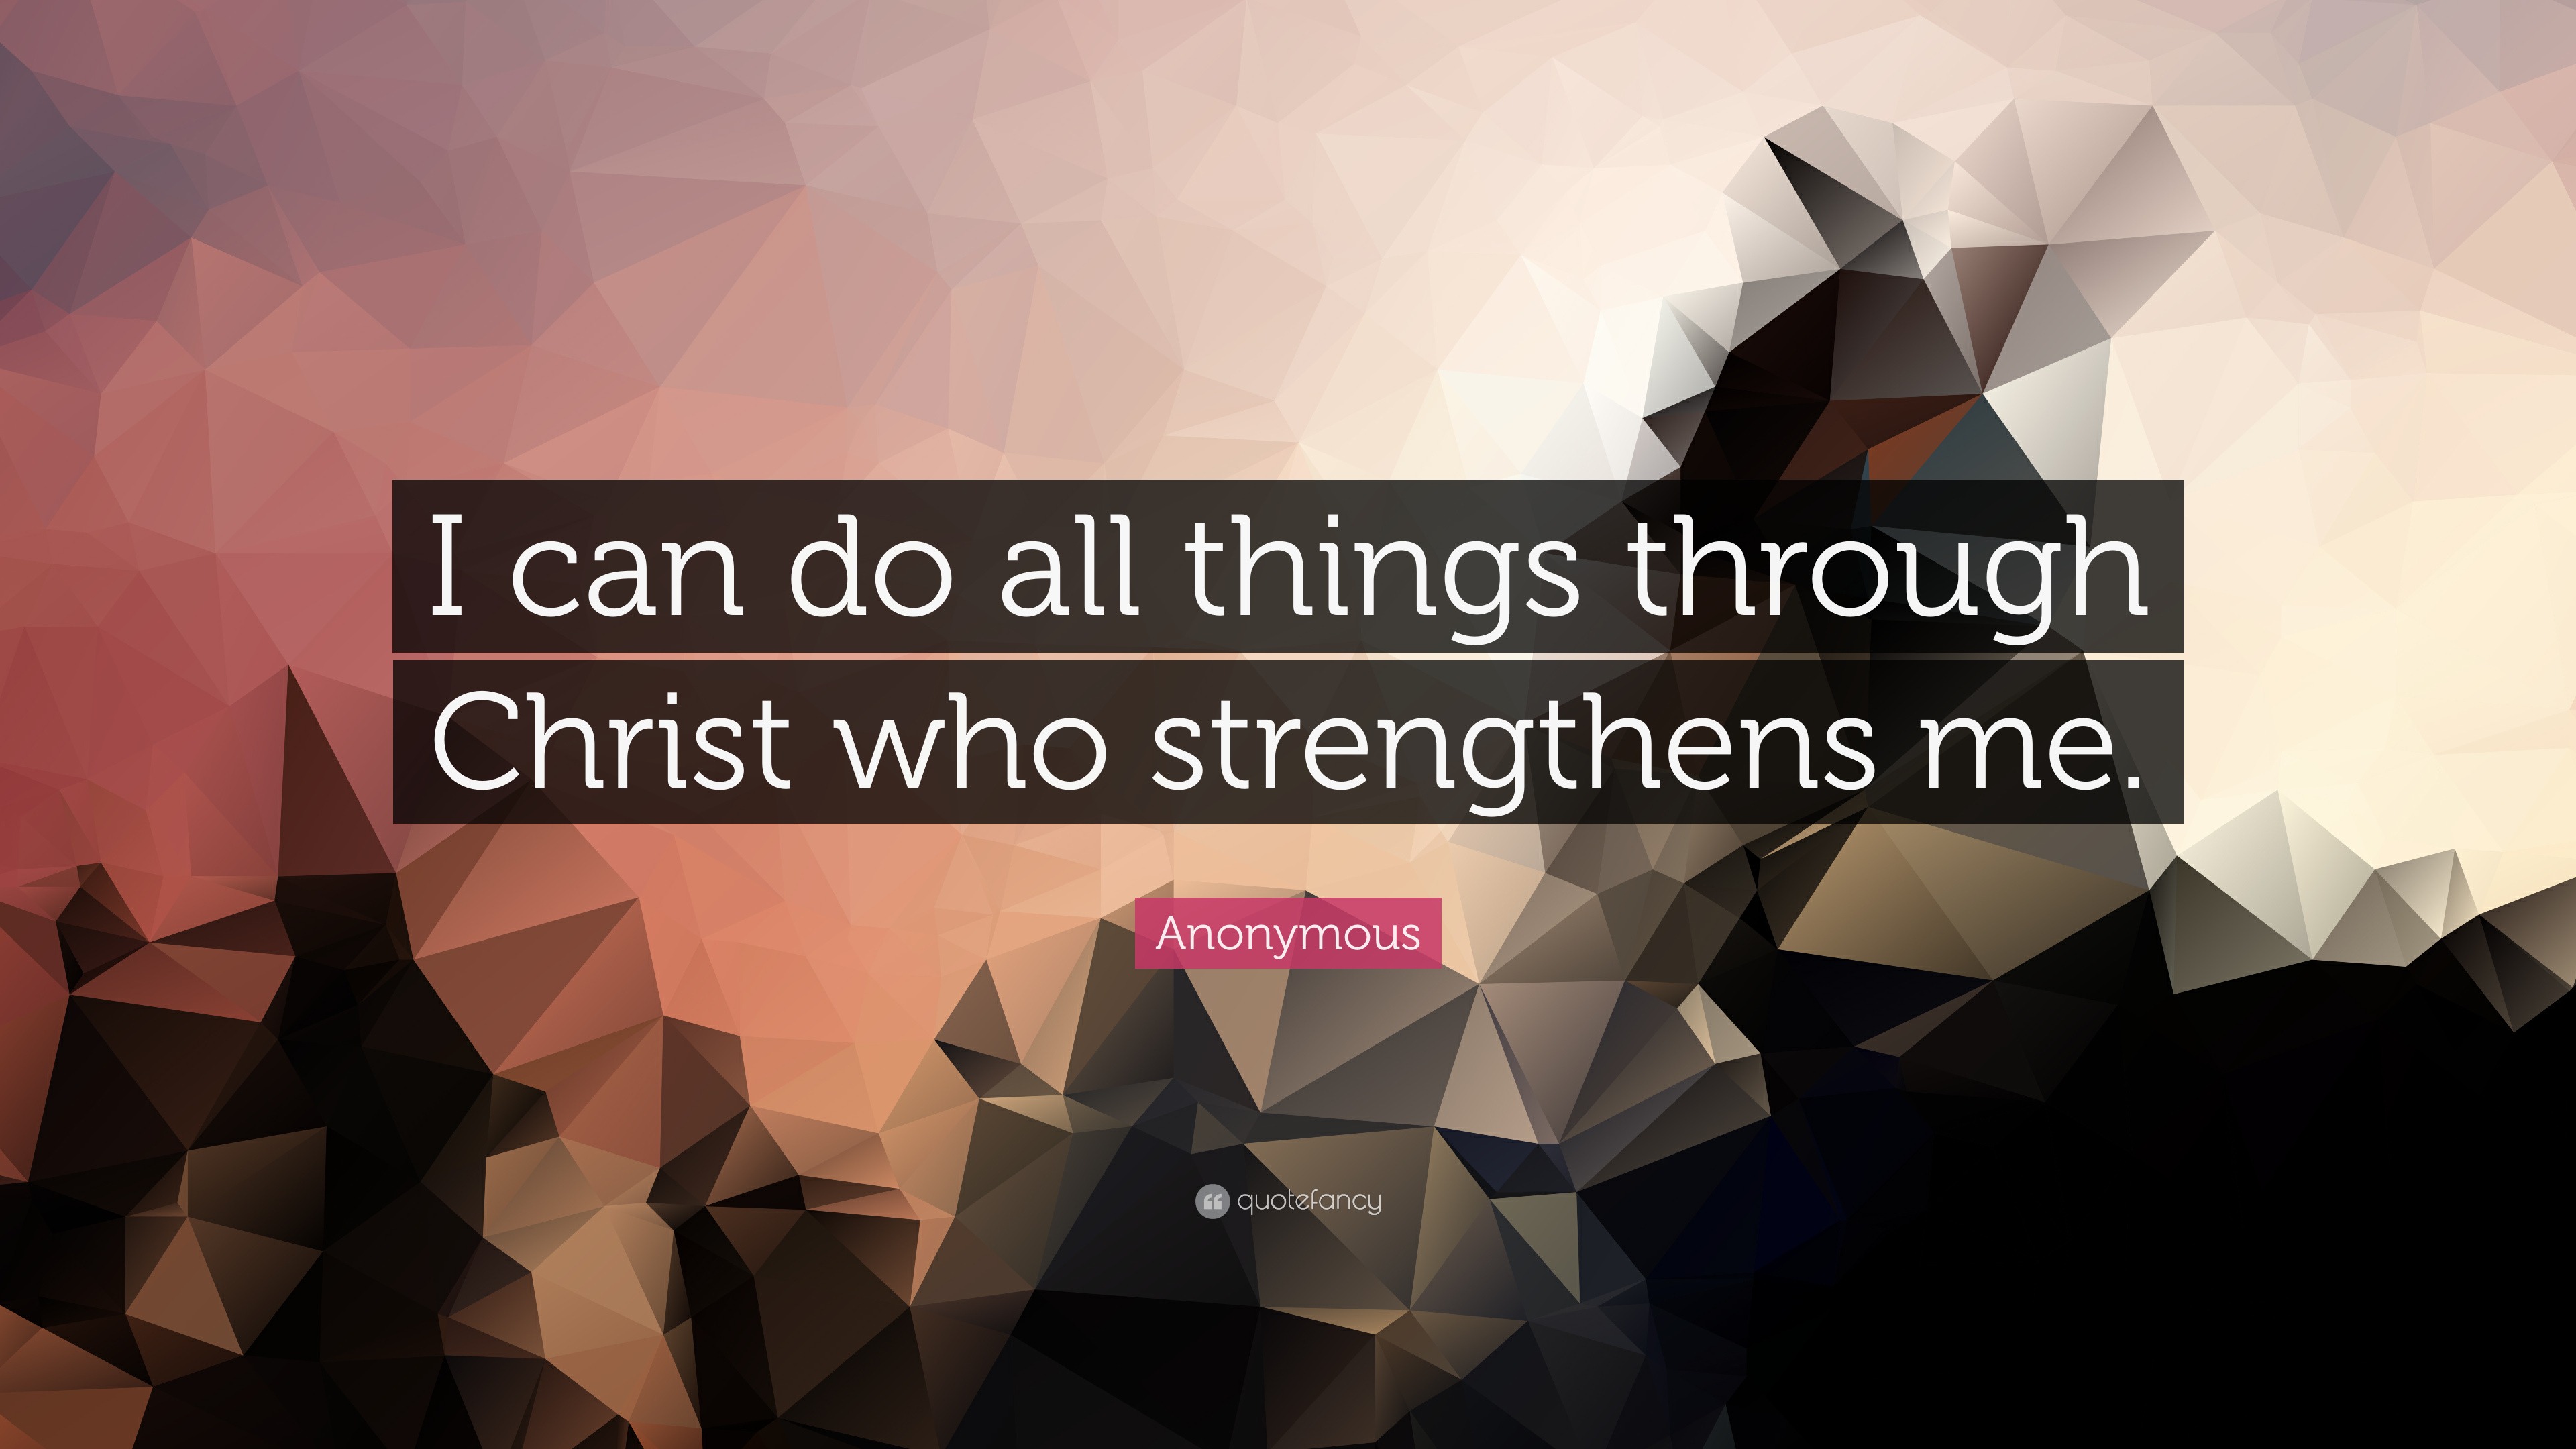 I Can Do This For Hours Anonymous Quote: “I can do all things through Christ who strengthens me.”